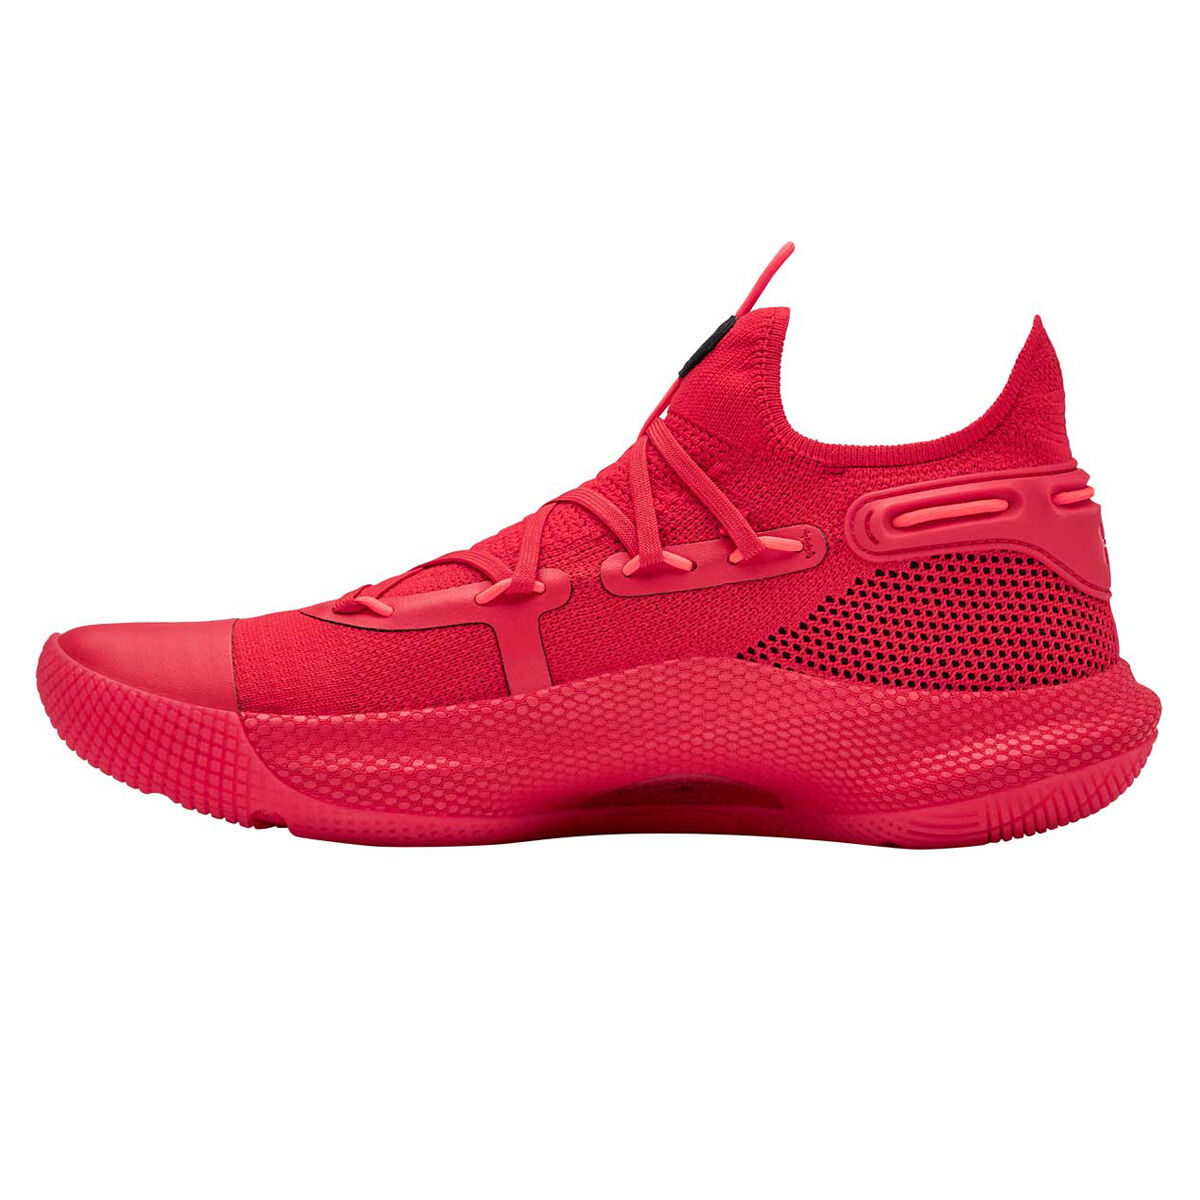 stephen curry 6 red